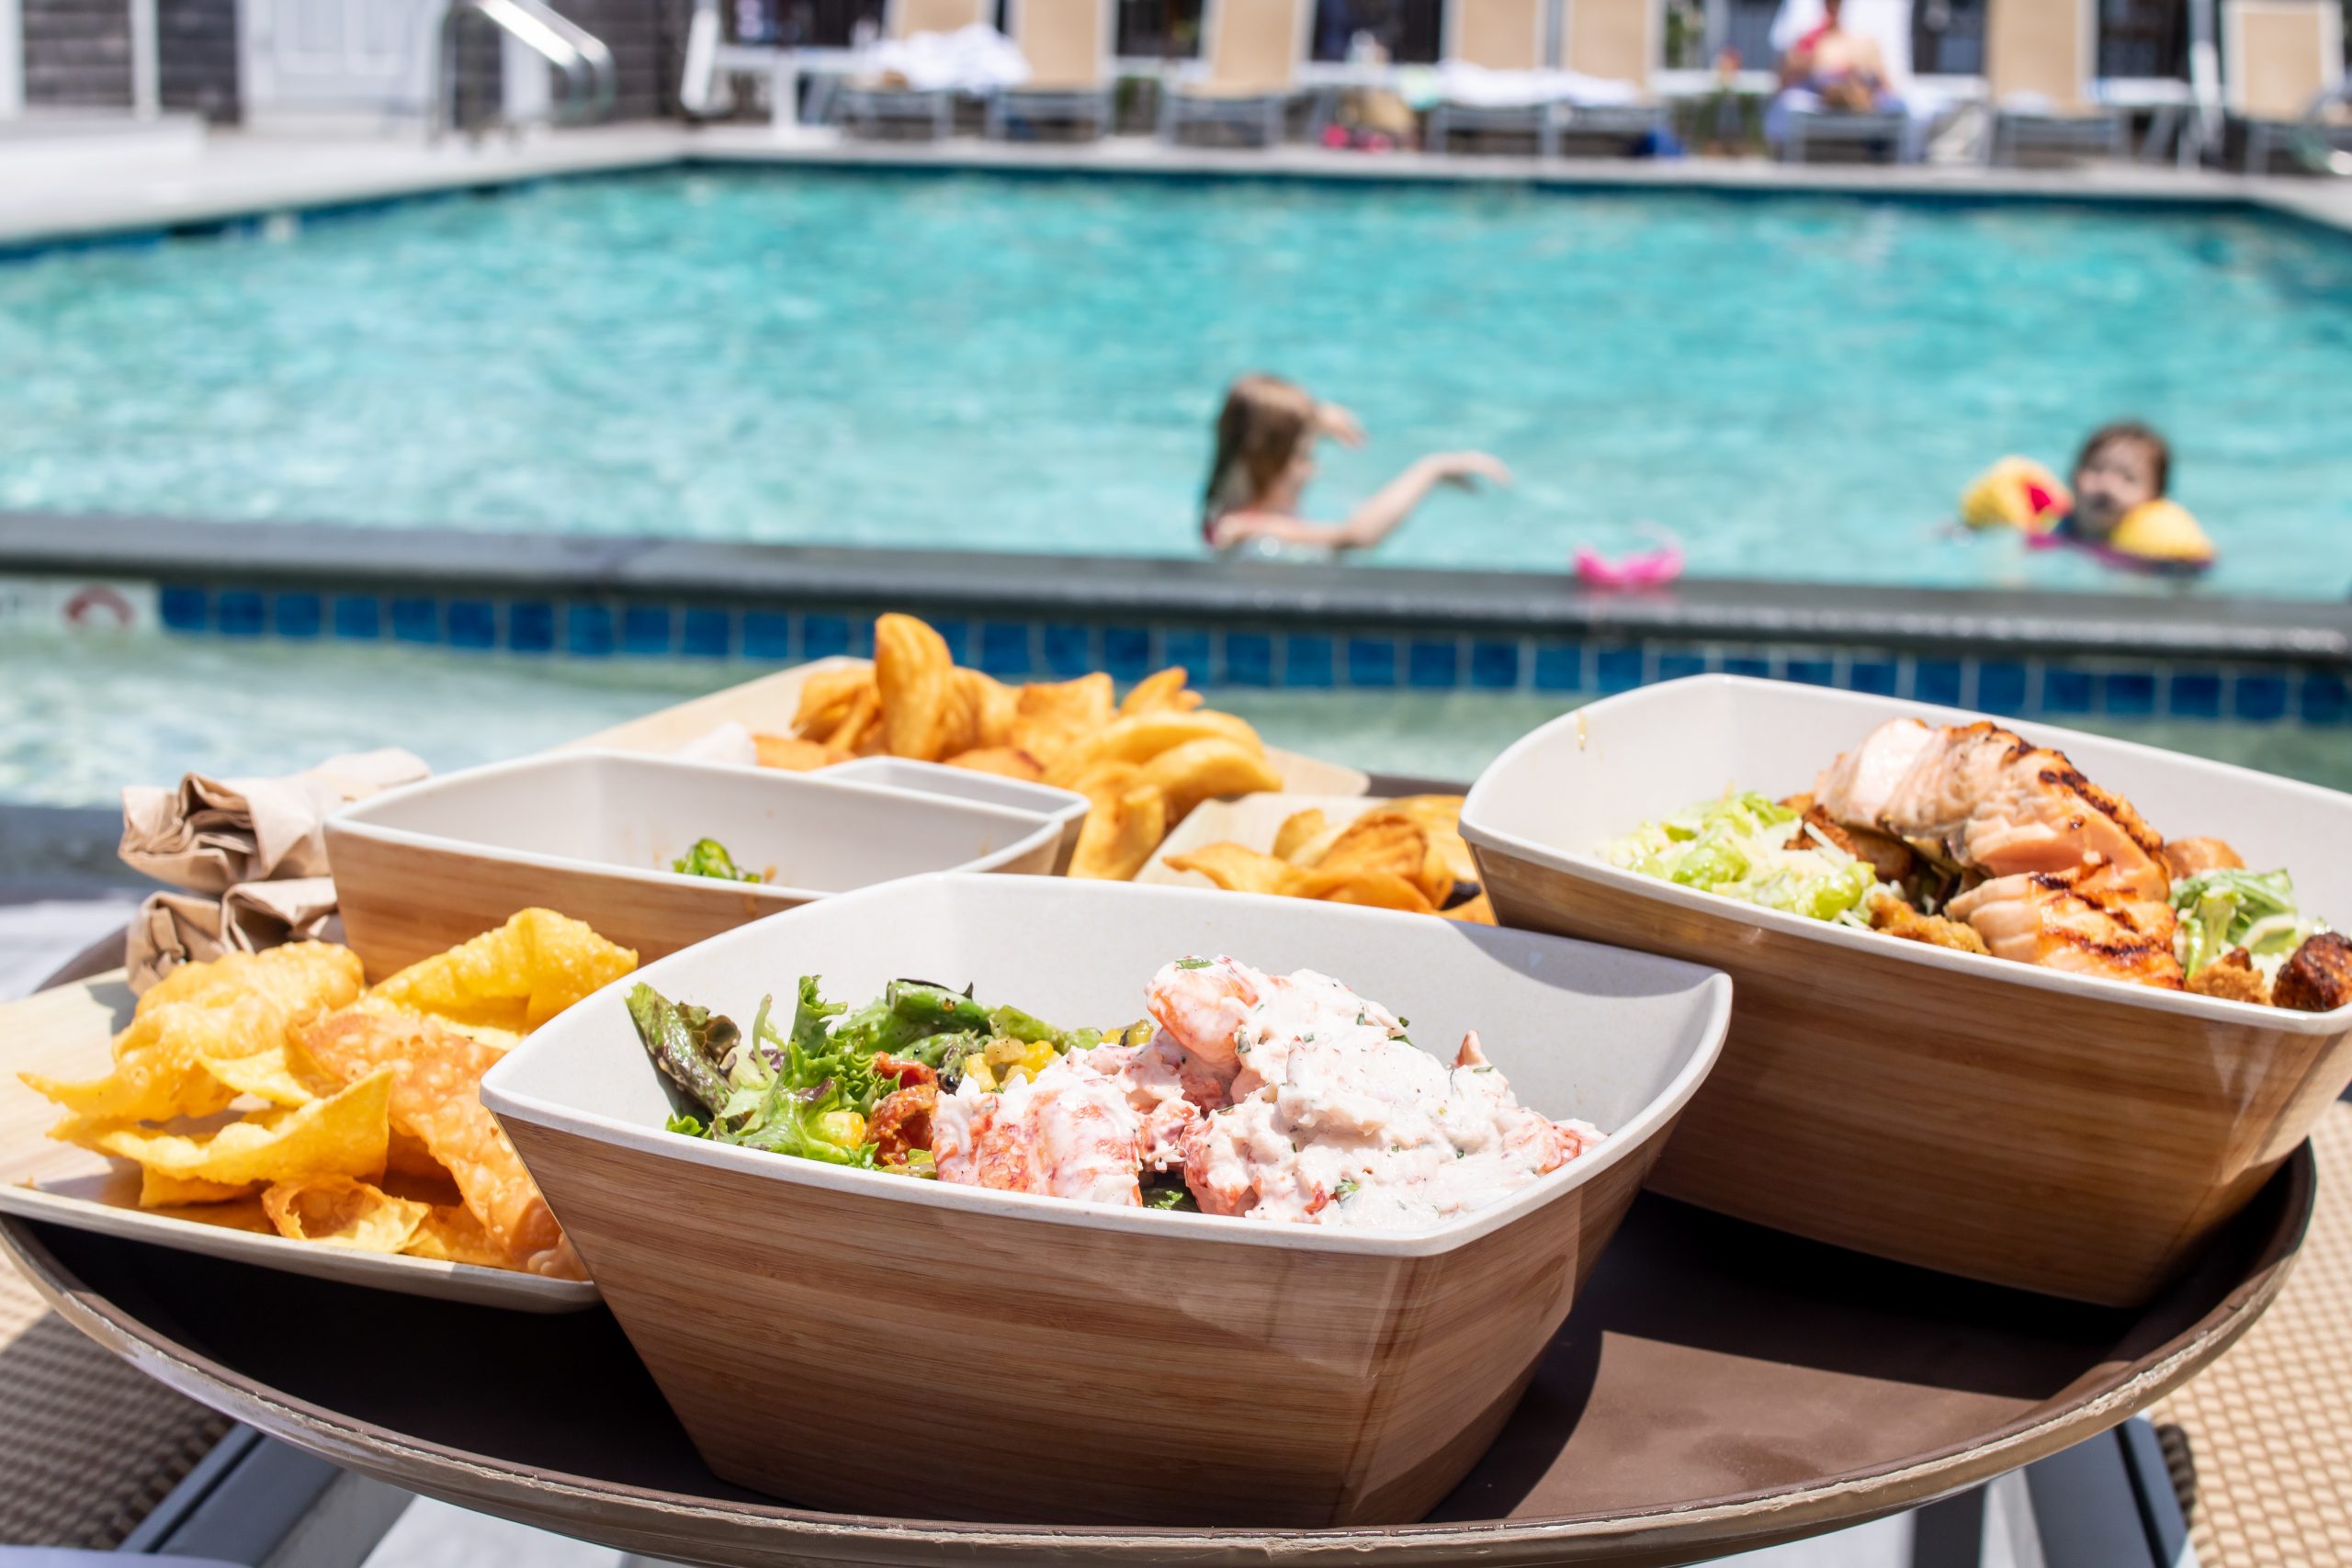 Poolside Lunch at the Nantucket Hotel from Breeze - featuring The Breeze Signature Salad topped with Lobster Salad and curly sea salt fries